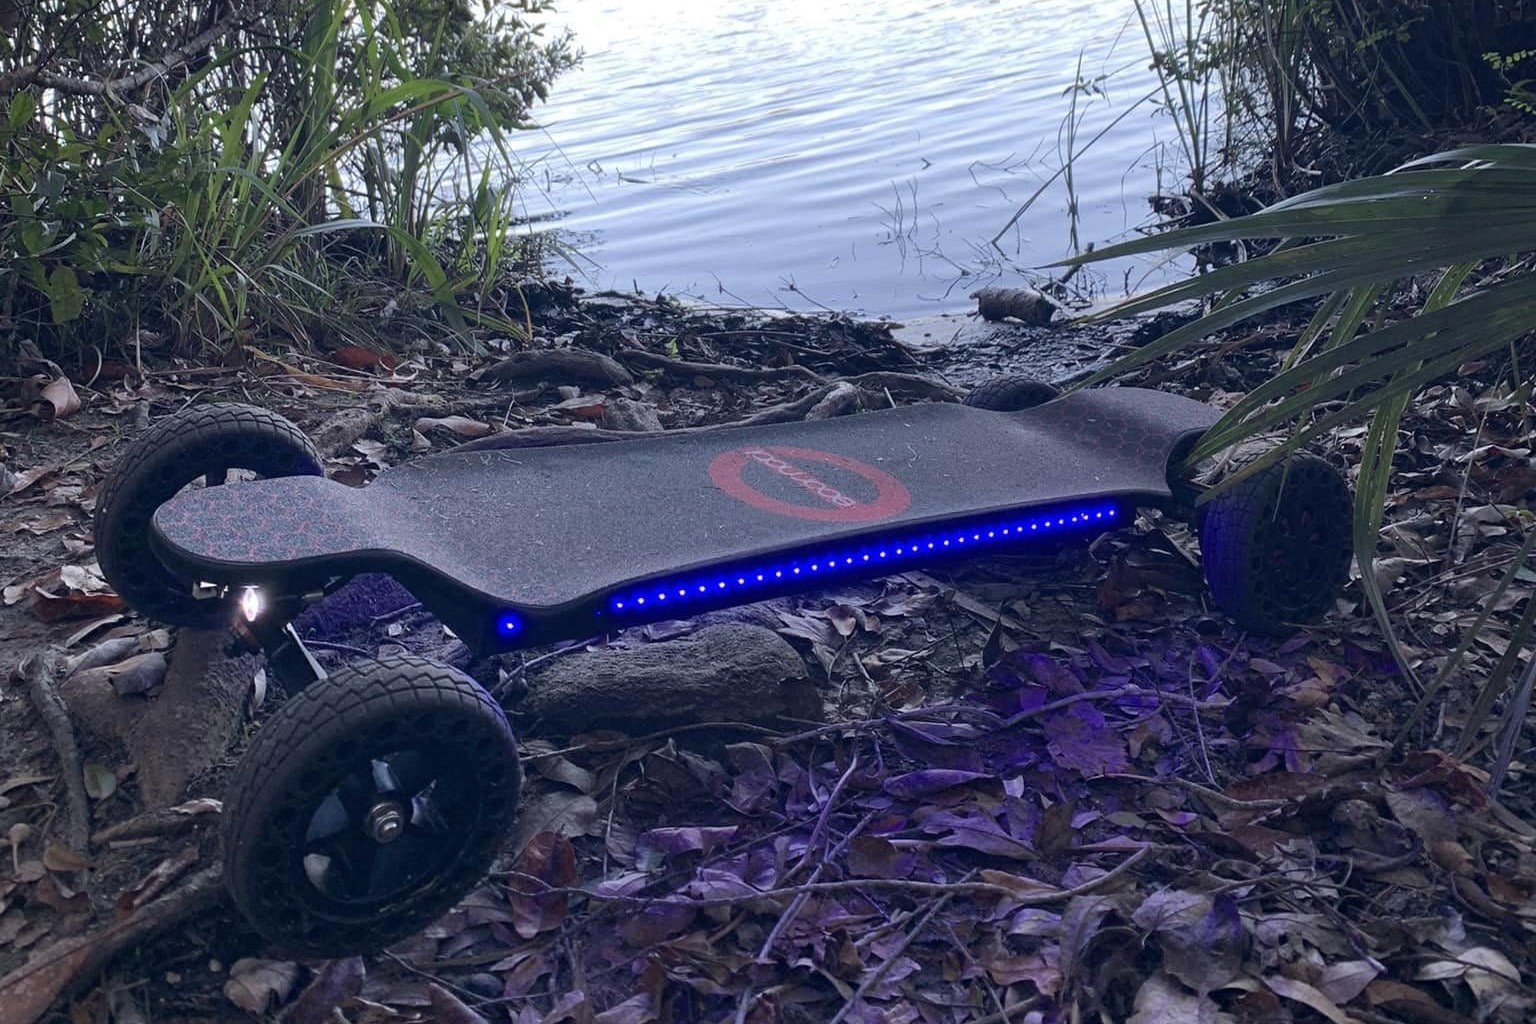 Maintaining Electric Skateboards After Wet Riding